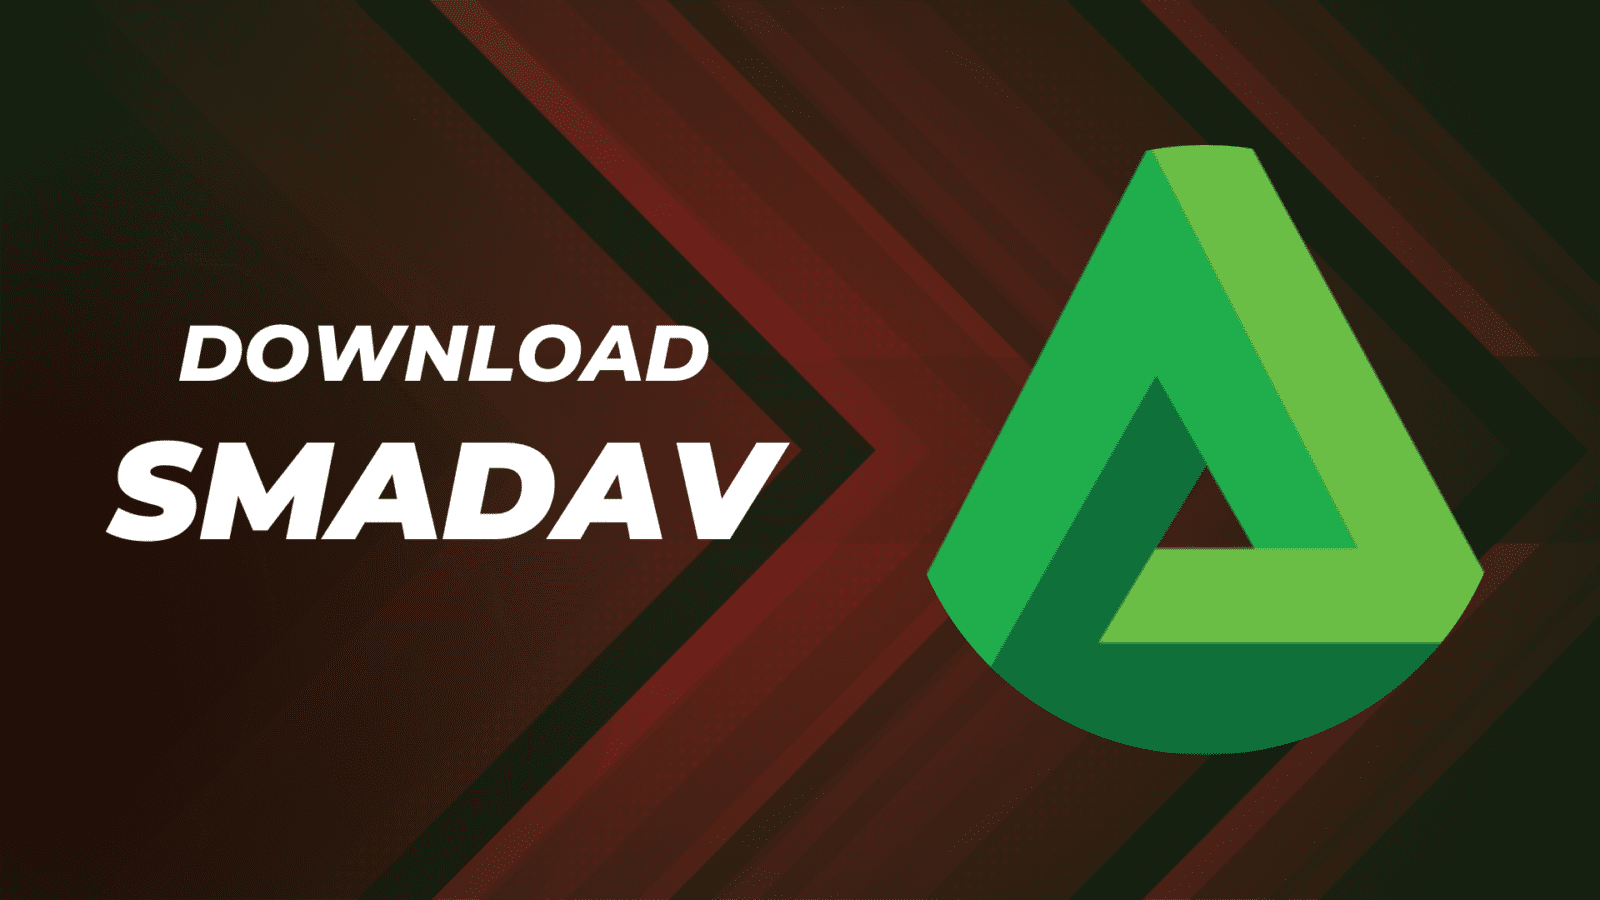 The image features a green geometric "A" shaped logo on a dark, gradient background with diagonal red and green lines. To the left of the logo, the text "DOWNLOAD SMADAV v15.2" is prominently displayed in bold white letters.